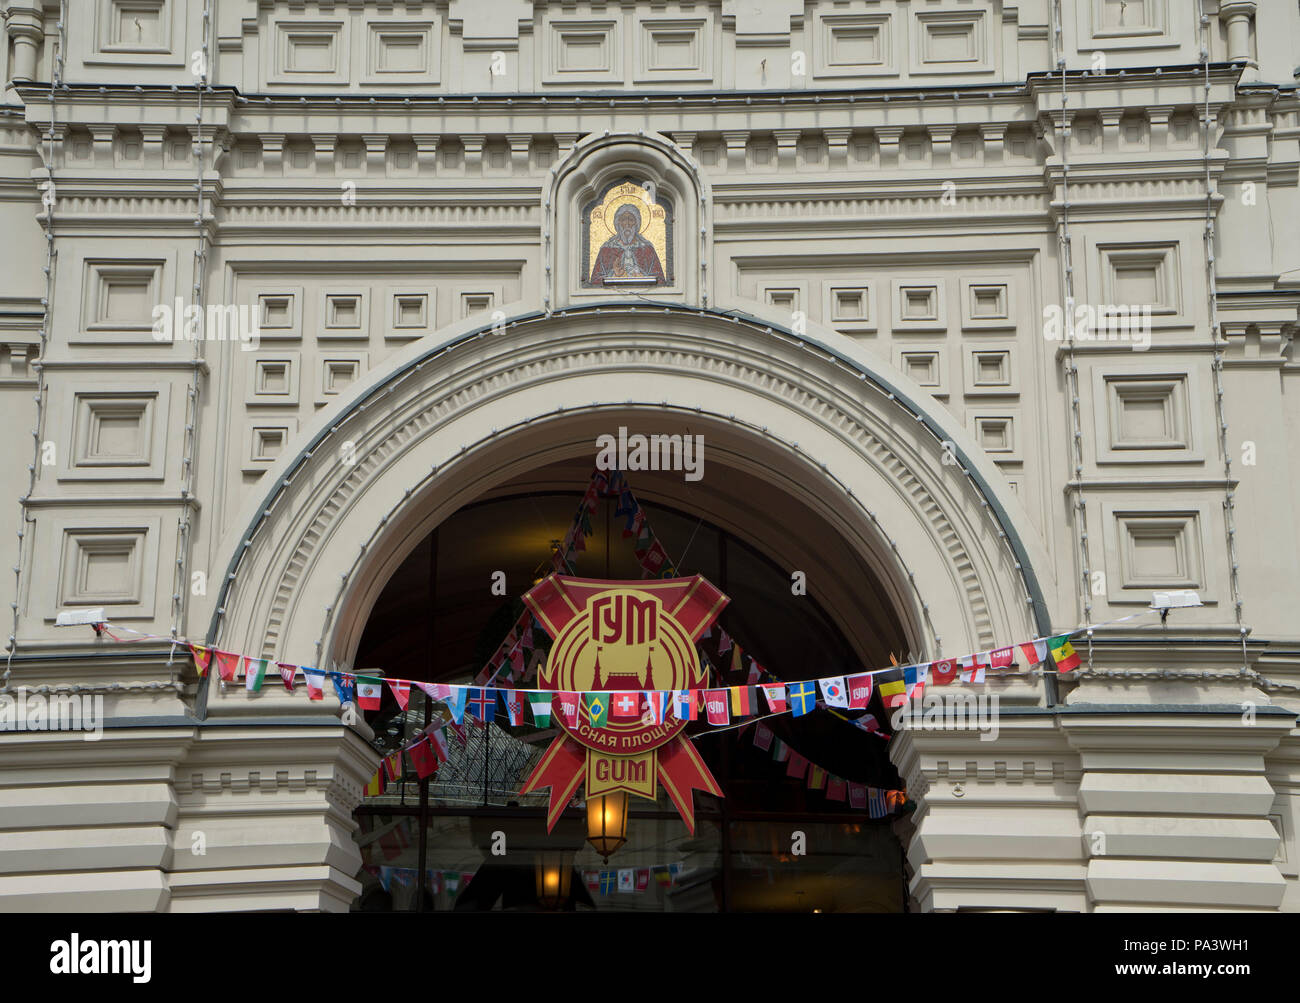 Entrance to the famous Gum shopping department stores near Red Square, Moscow,Russia Stock Photo